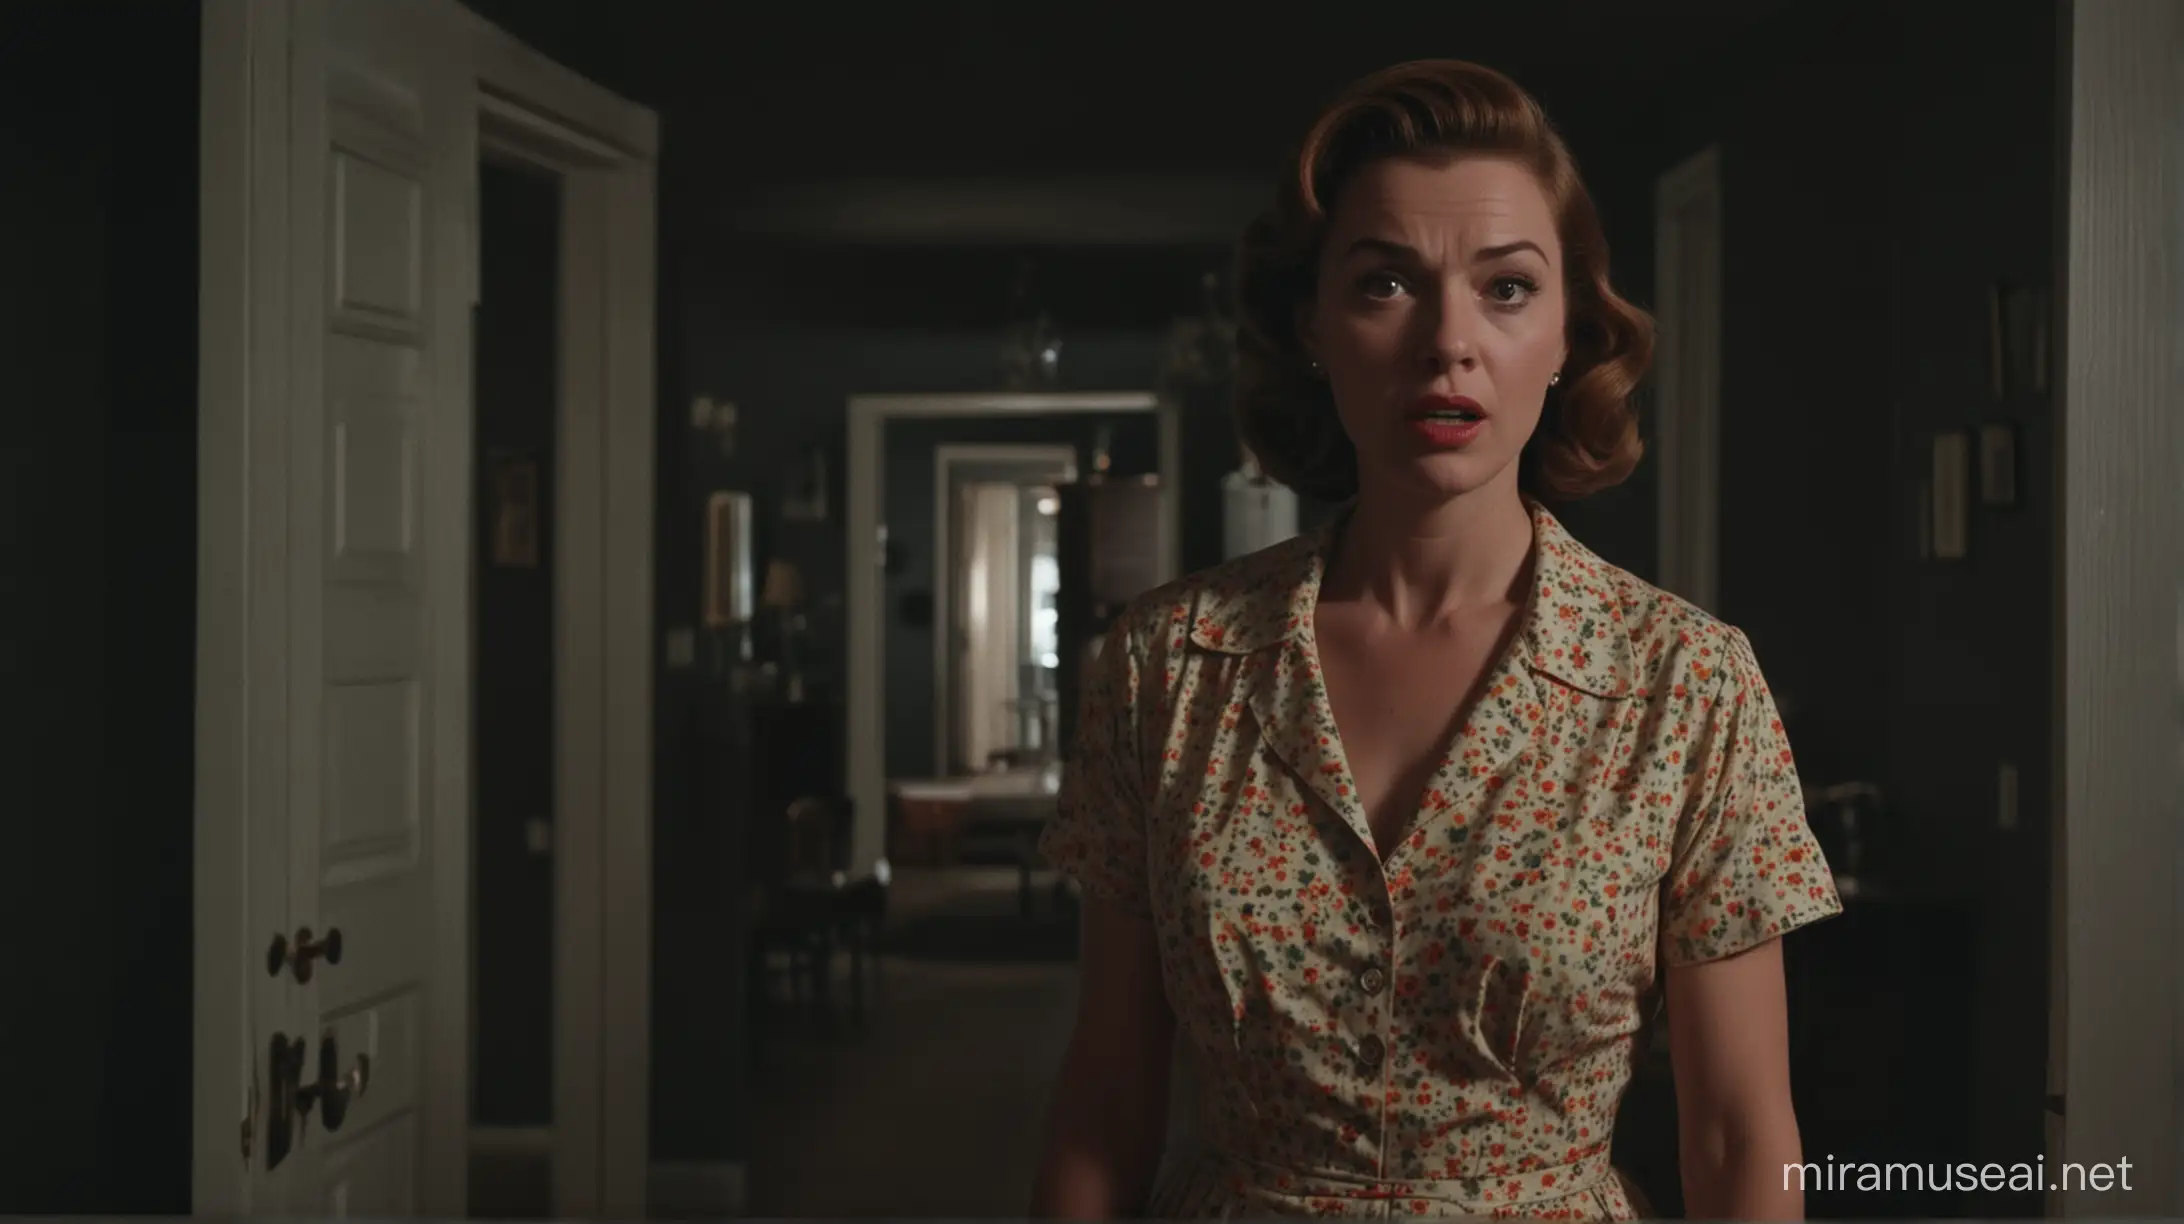 1950s Housewife Hunting People in Dimly Lit Home